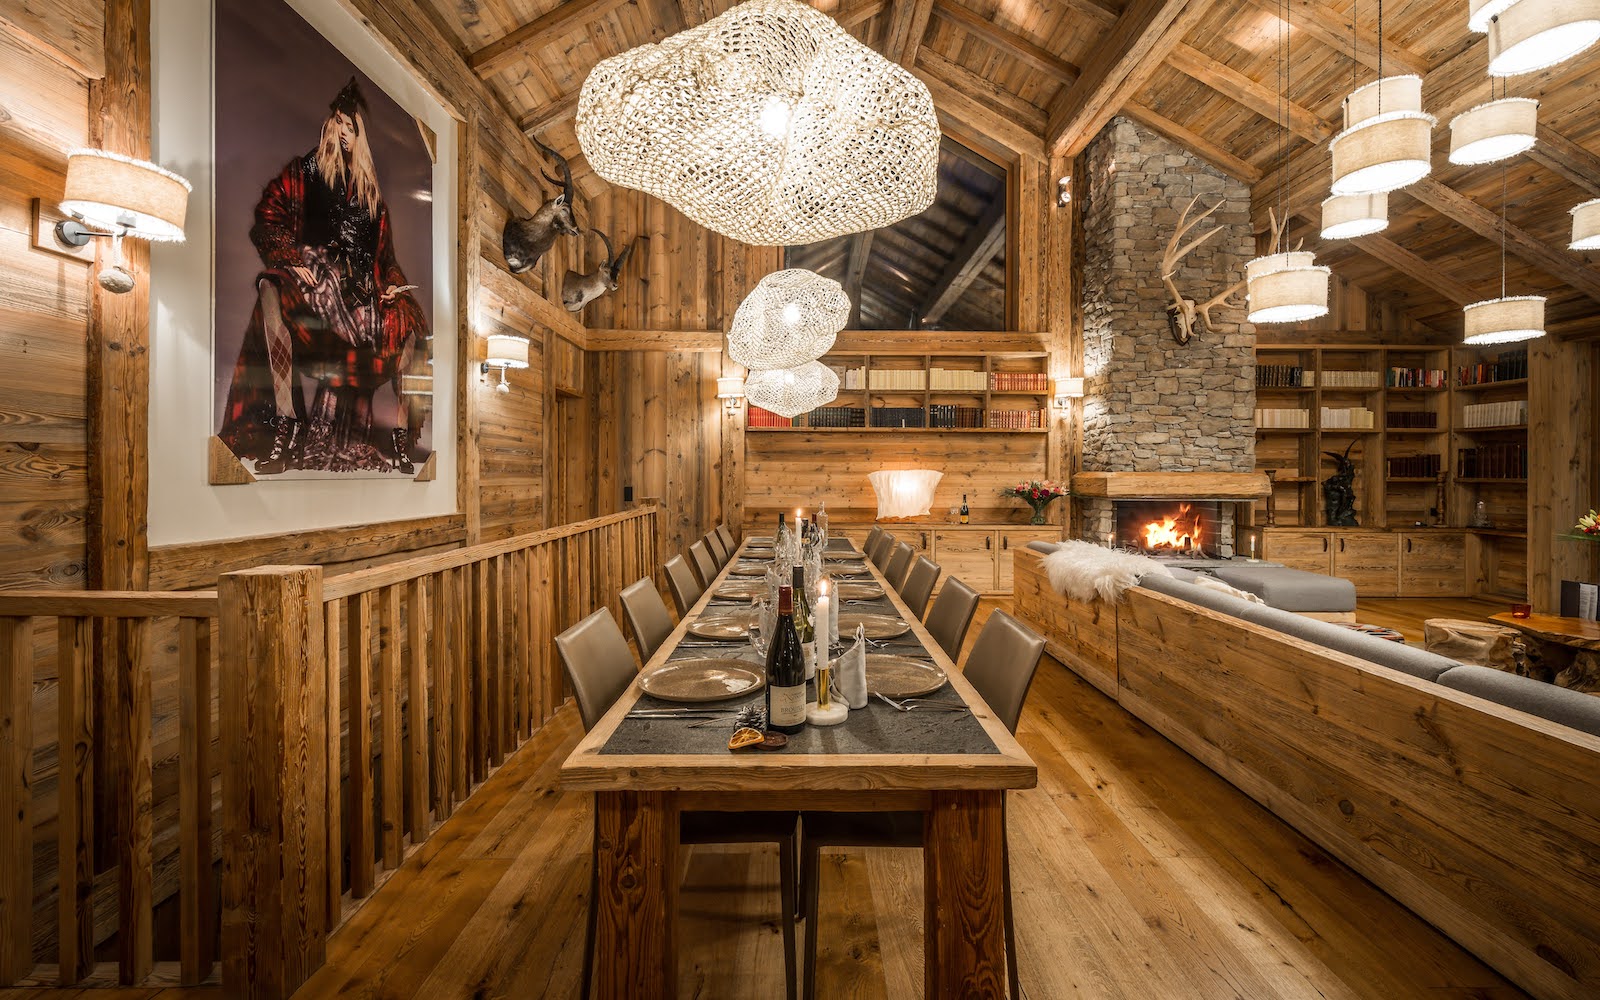 Modern alpine interiors inside Chalet Inoka, with large contemoporary artwork on wall and cloud-like chandeliers from ceiling